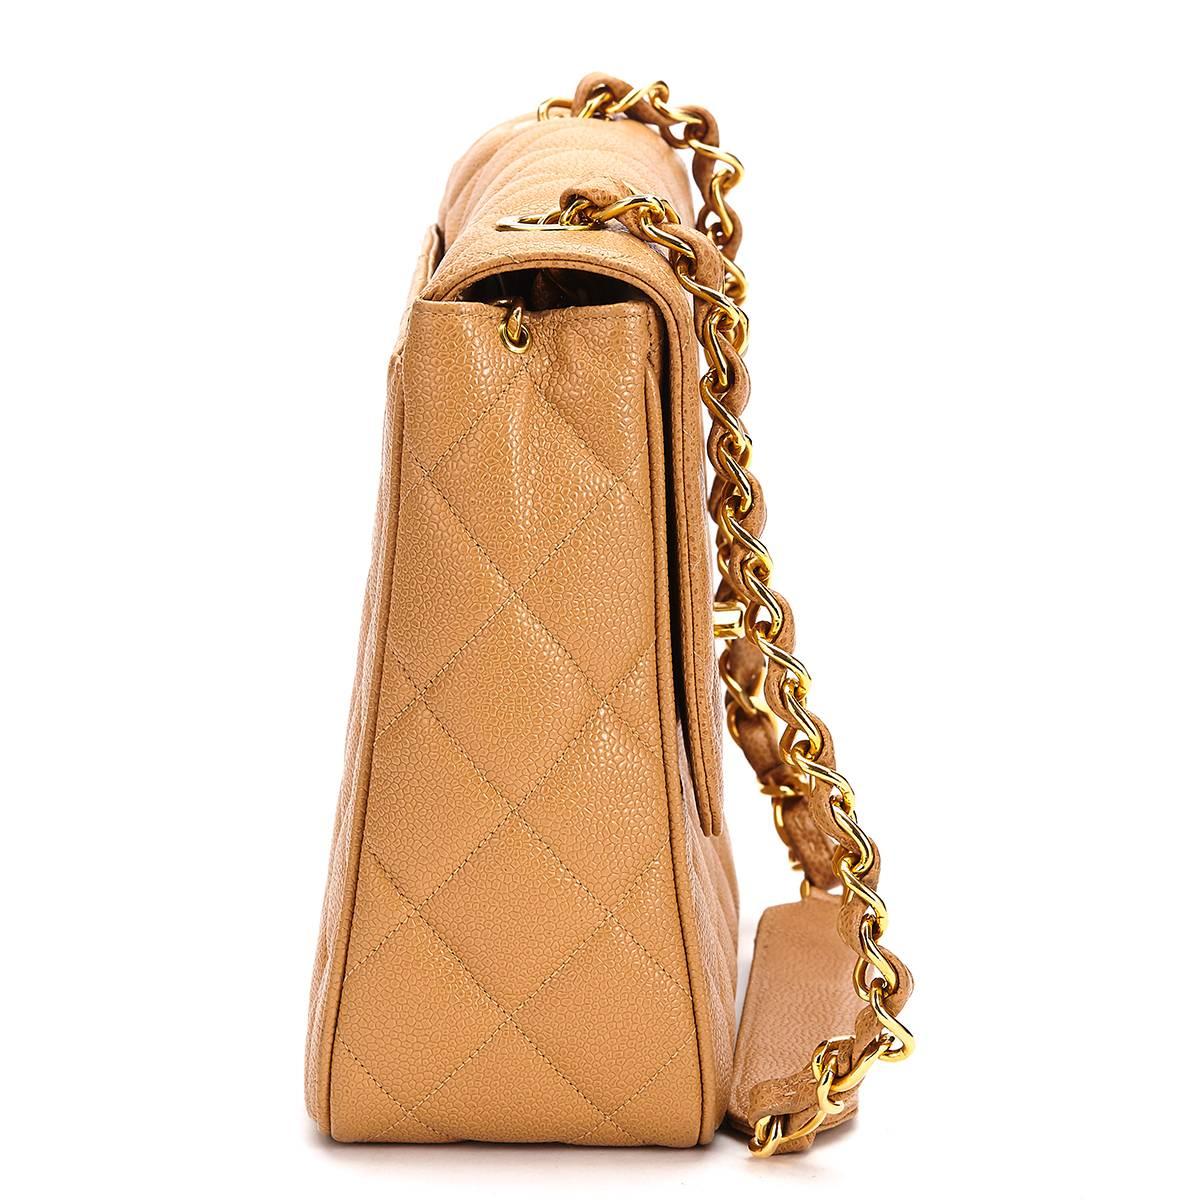 CHANEL
Tan Quilted Caviar Leather Vintage Single Flap Bag

This CHANEL Single Flap Bag is in Very Good Pre-Owned Condition accompanied by Chanel Dust Bag. Circa 1994. Primarily made from Caviar Leather complimented by Gold hardware. Our 